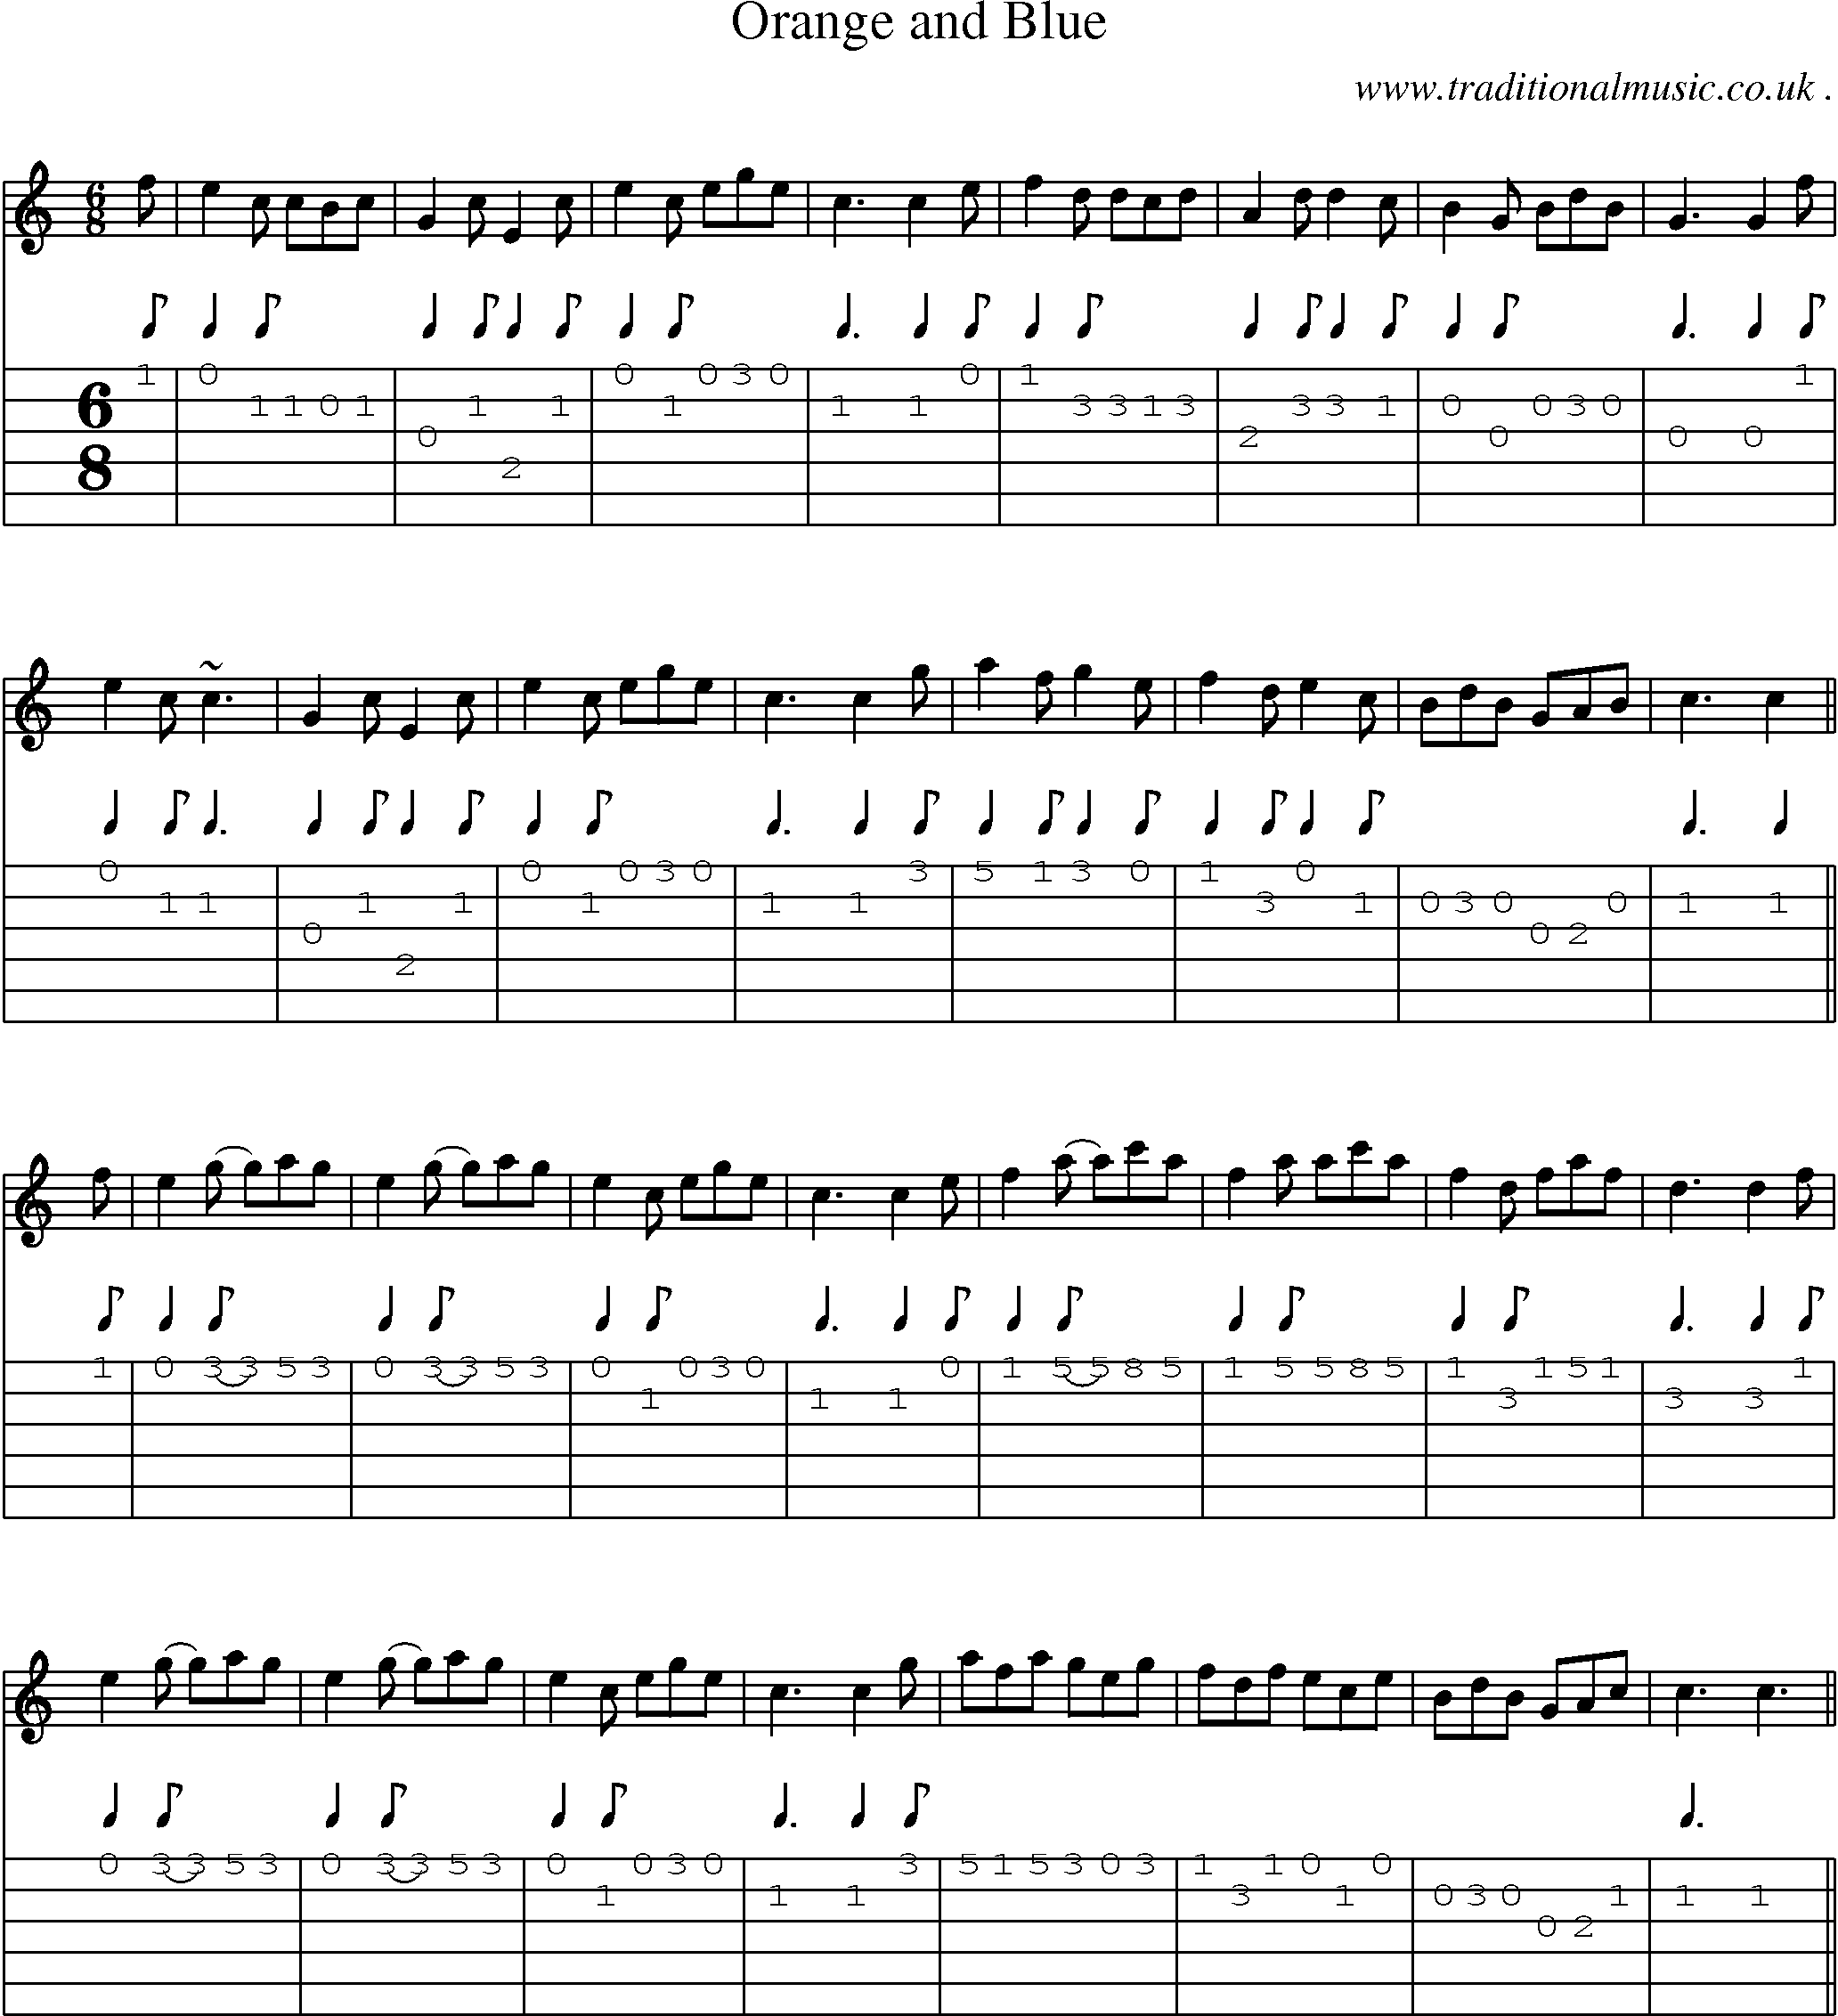 Sheet-music  score, Chords and Guitar Tabs for Orange And Blue